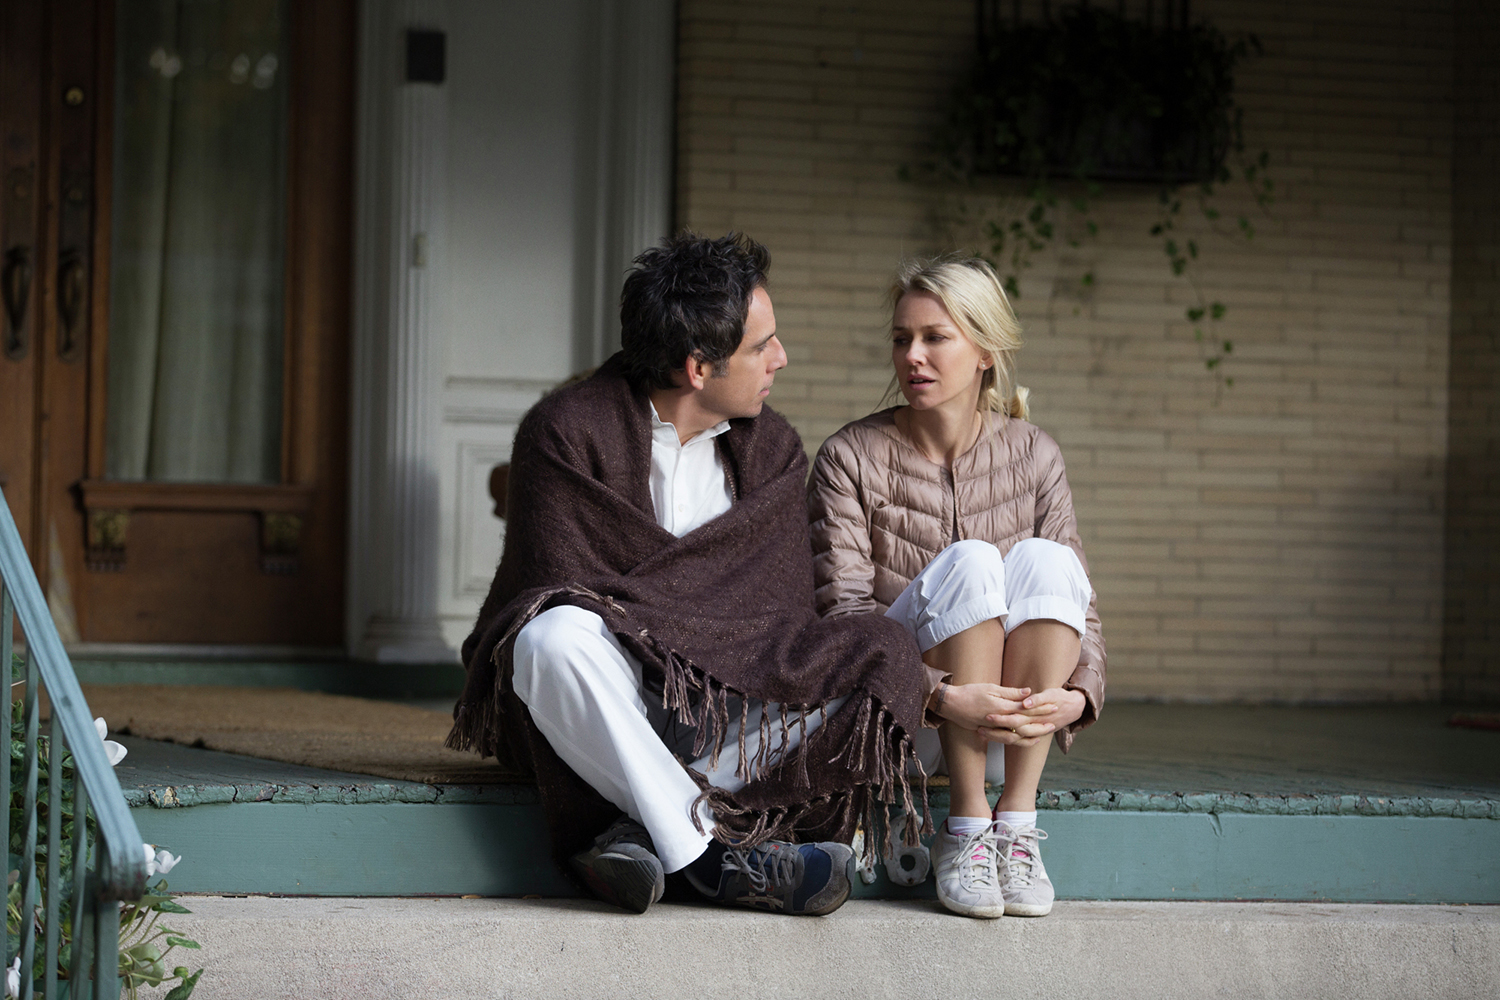 WHILE WE’RE YOUNG Should Please Its Director’s Fans